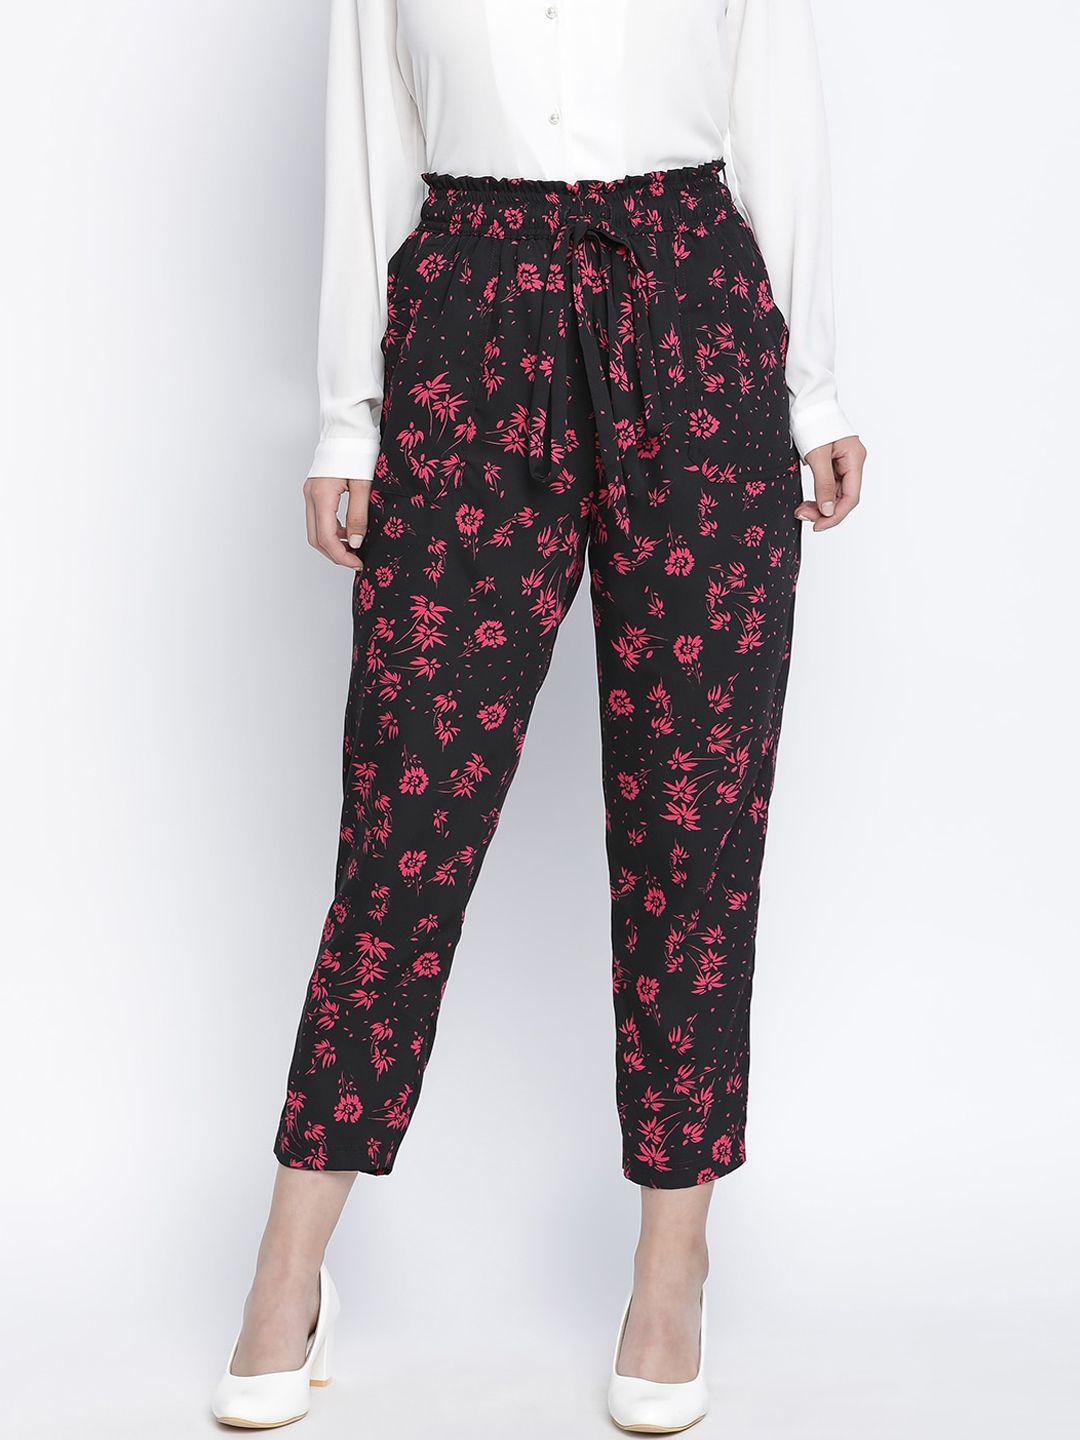 oxolloxo women black floral printed pleated peg trousers